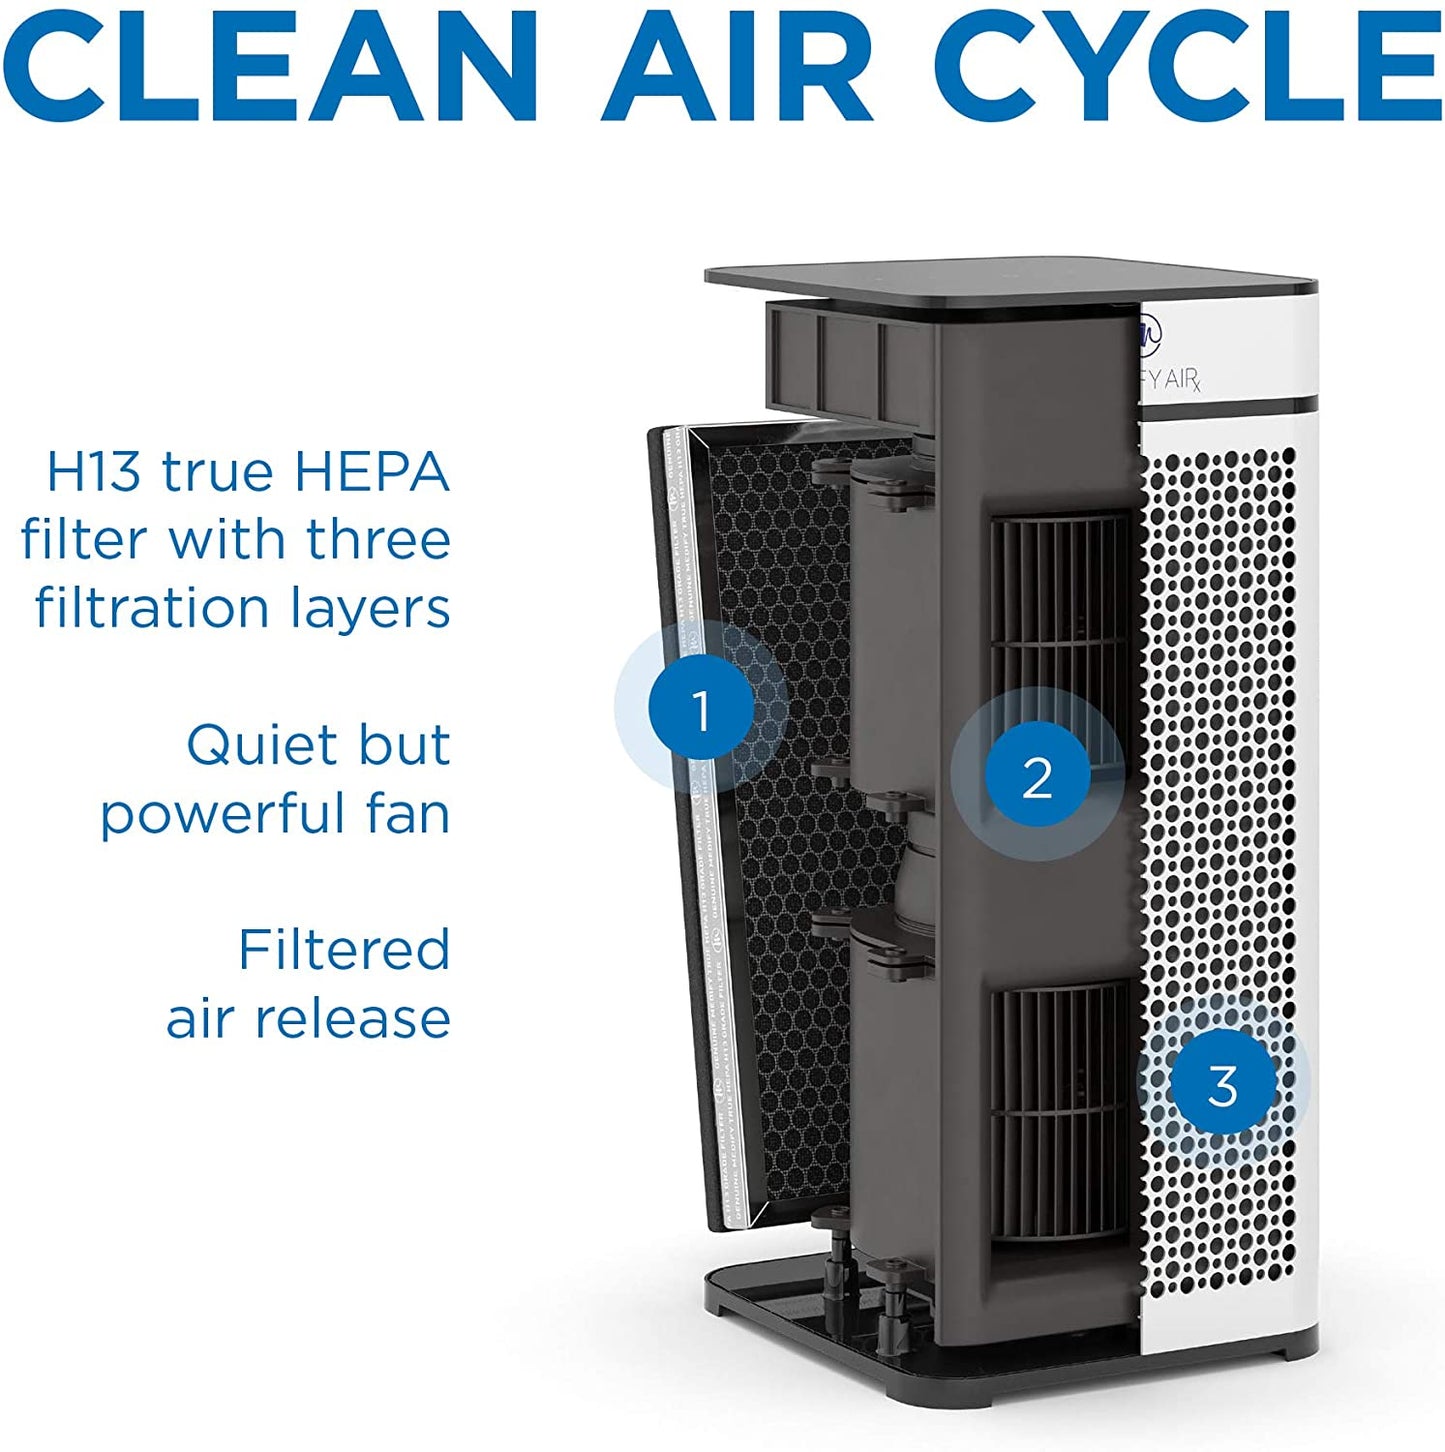 Medify MA-40 Air Purifier with H13 True HEPA Filter | 840 sq ft Coverage